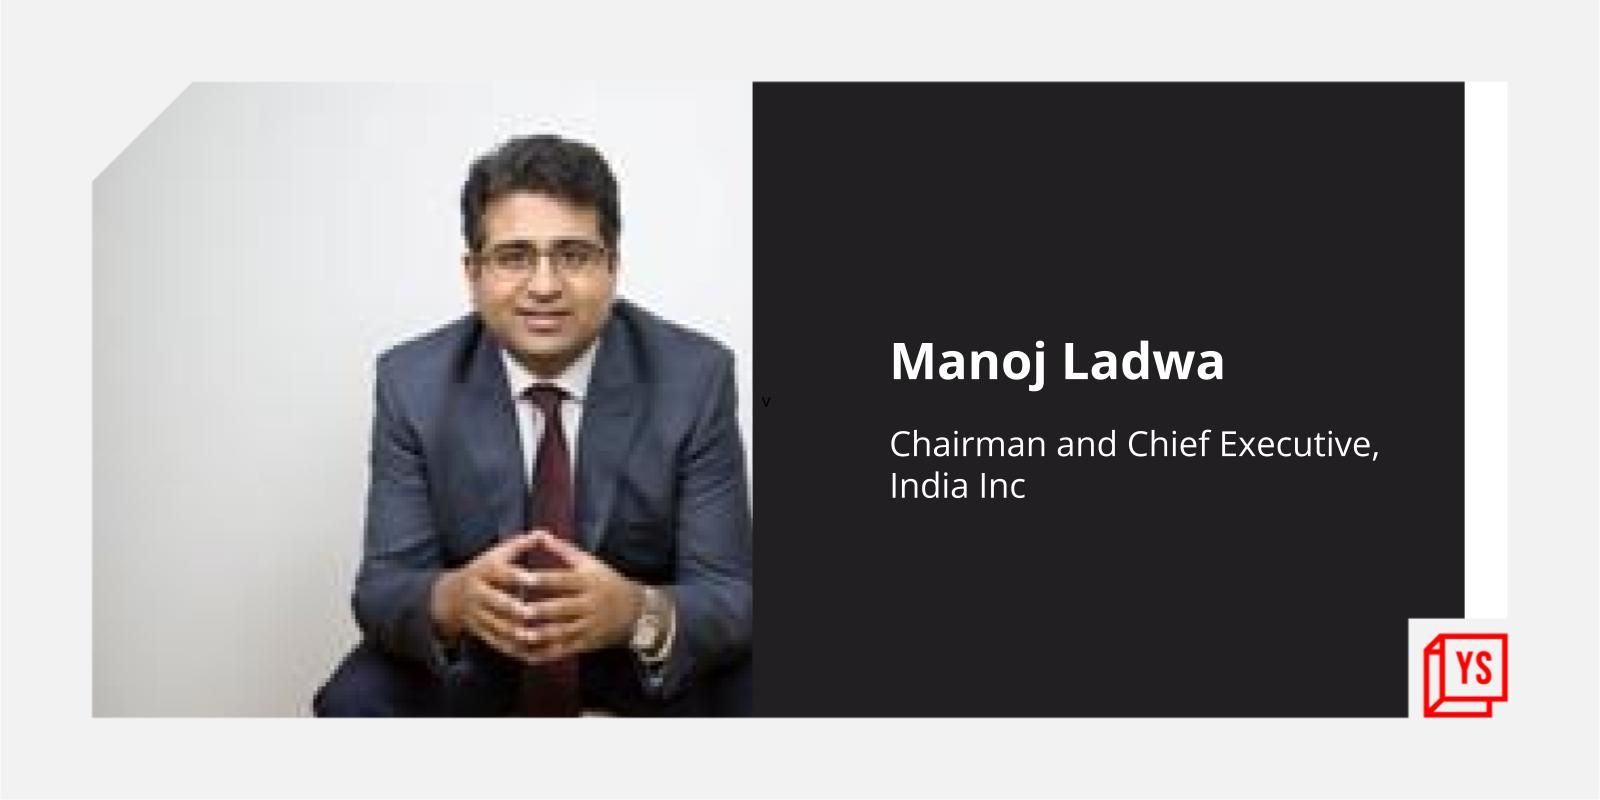 India story is driven by its people and its businesses: Manoj Ladwa, Chairman of India Inc